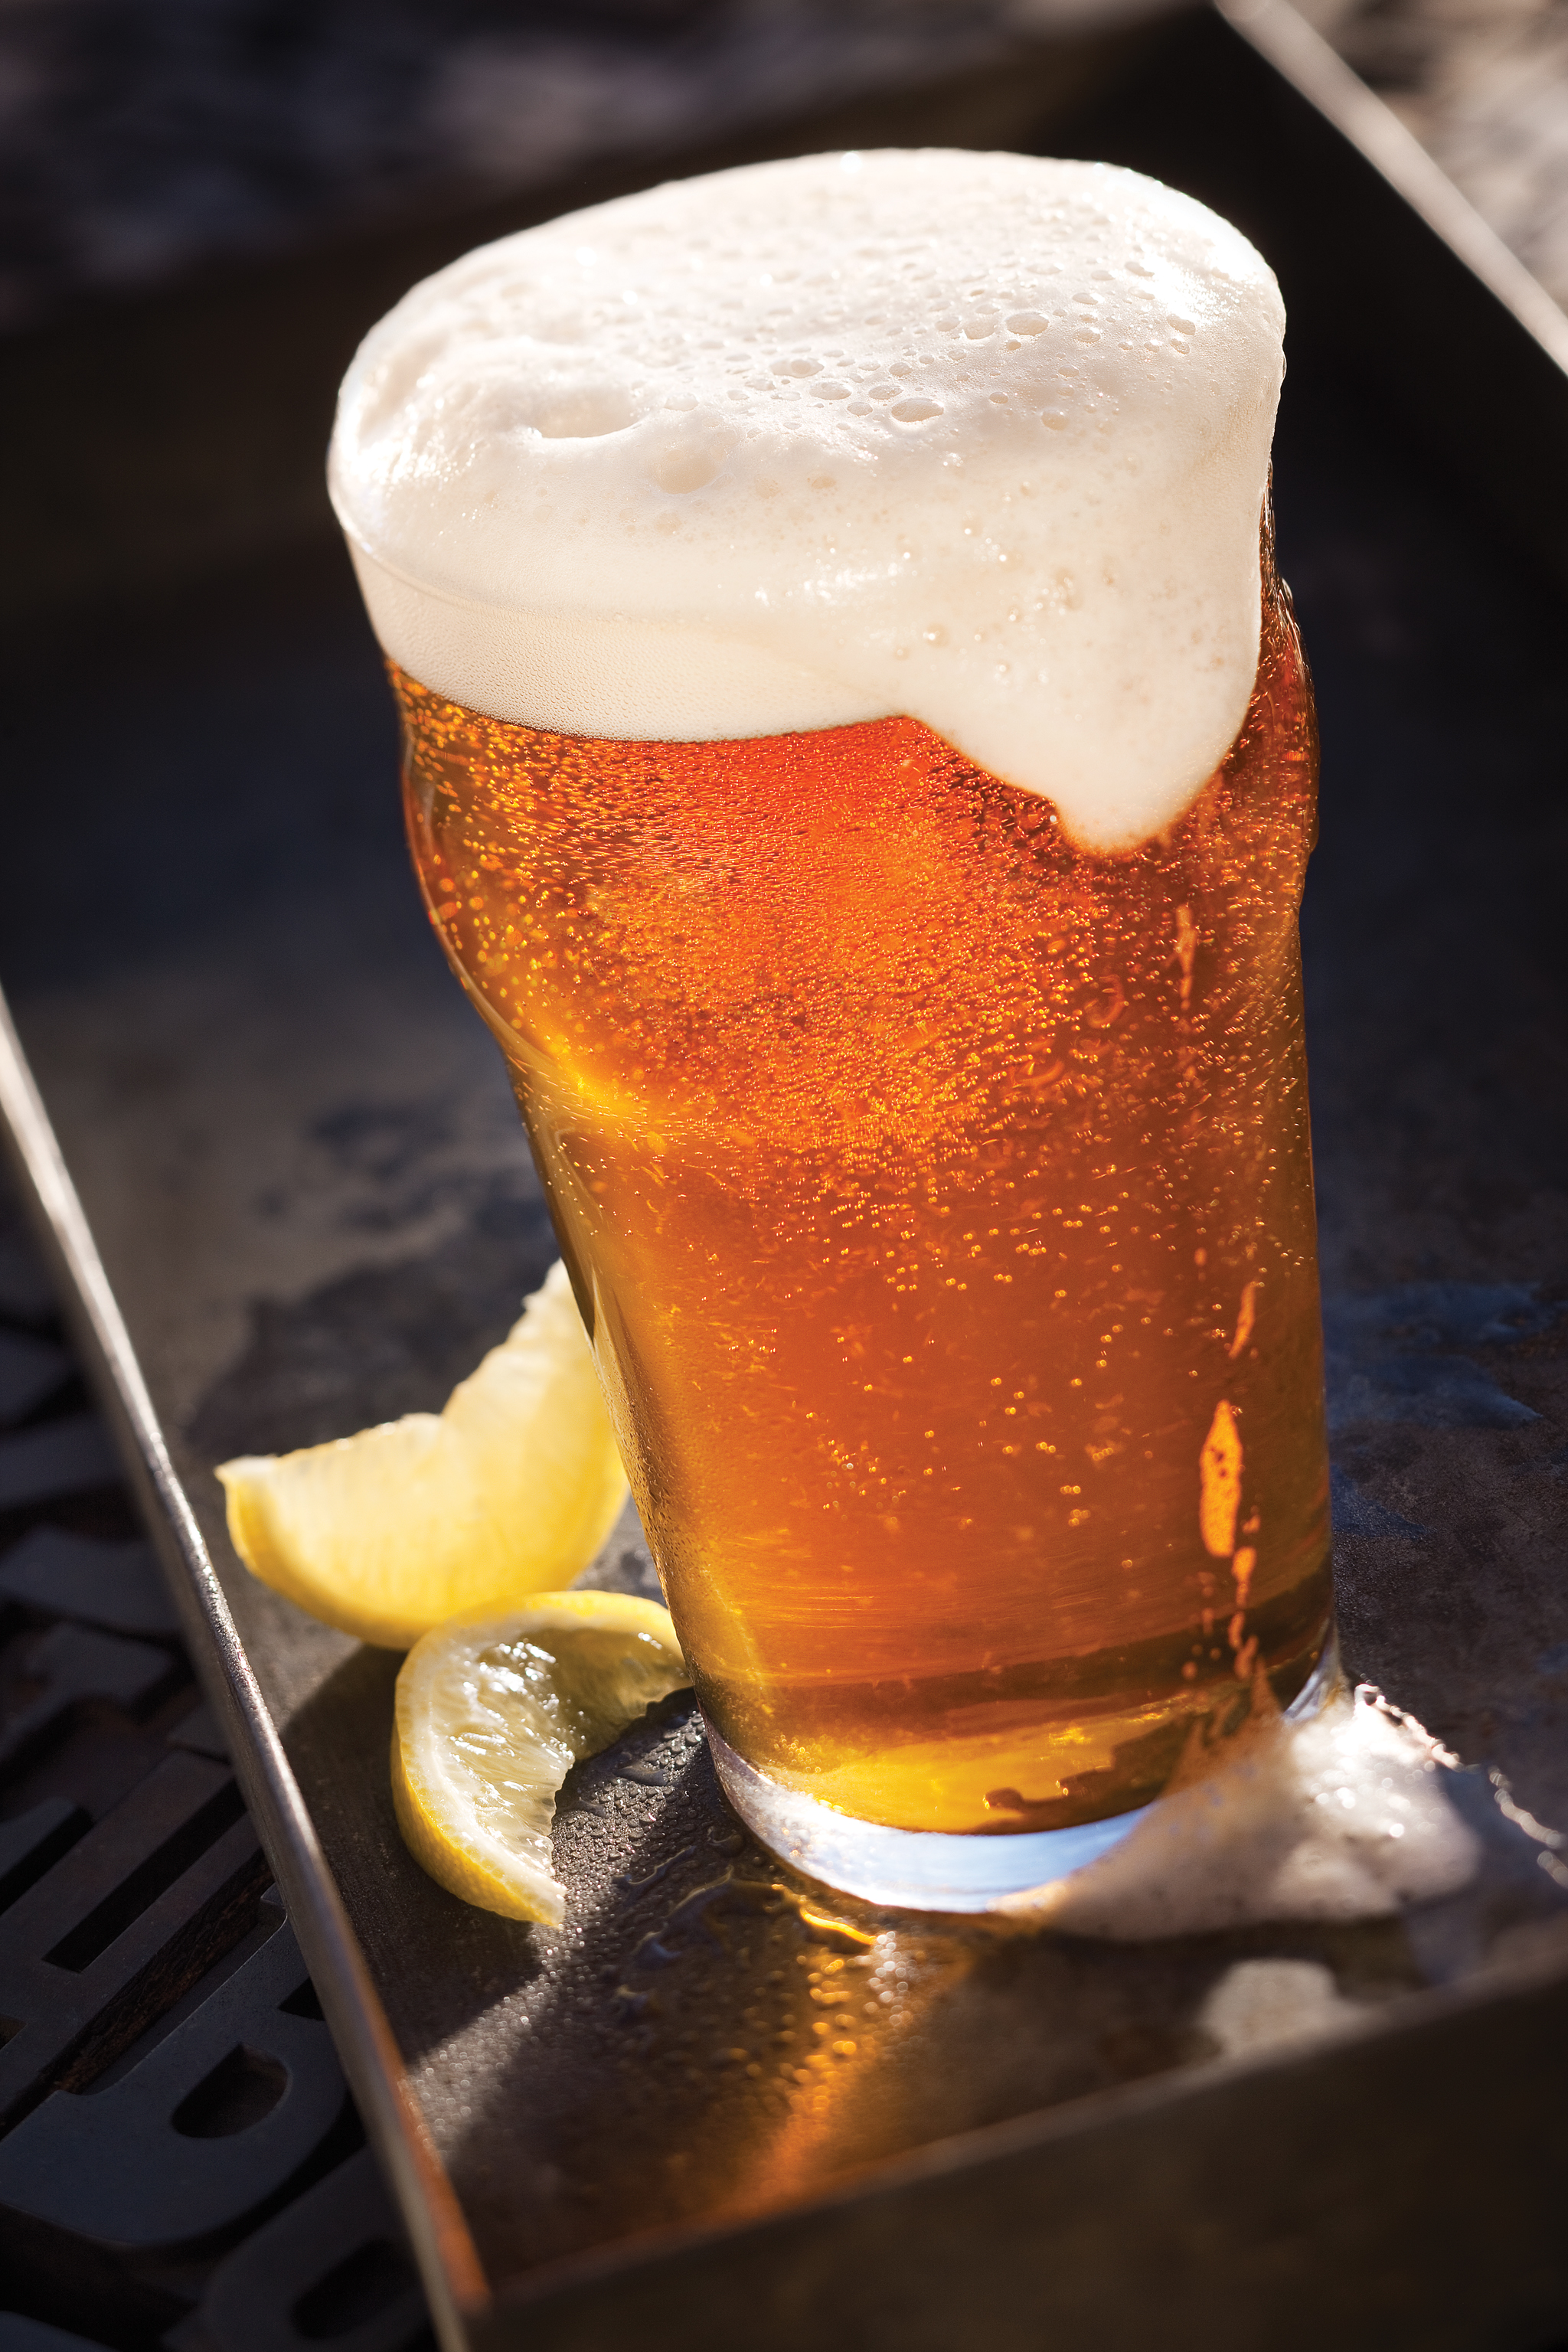 Made with your favorite honey wheat ale, ginger, lemon and the perfect sweetness of honey, you'll be sipping this Honey Shandy all night long.